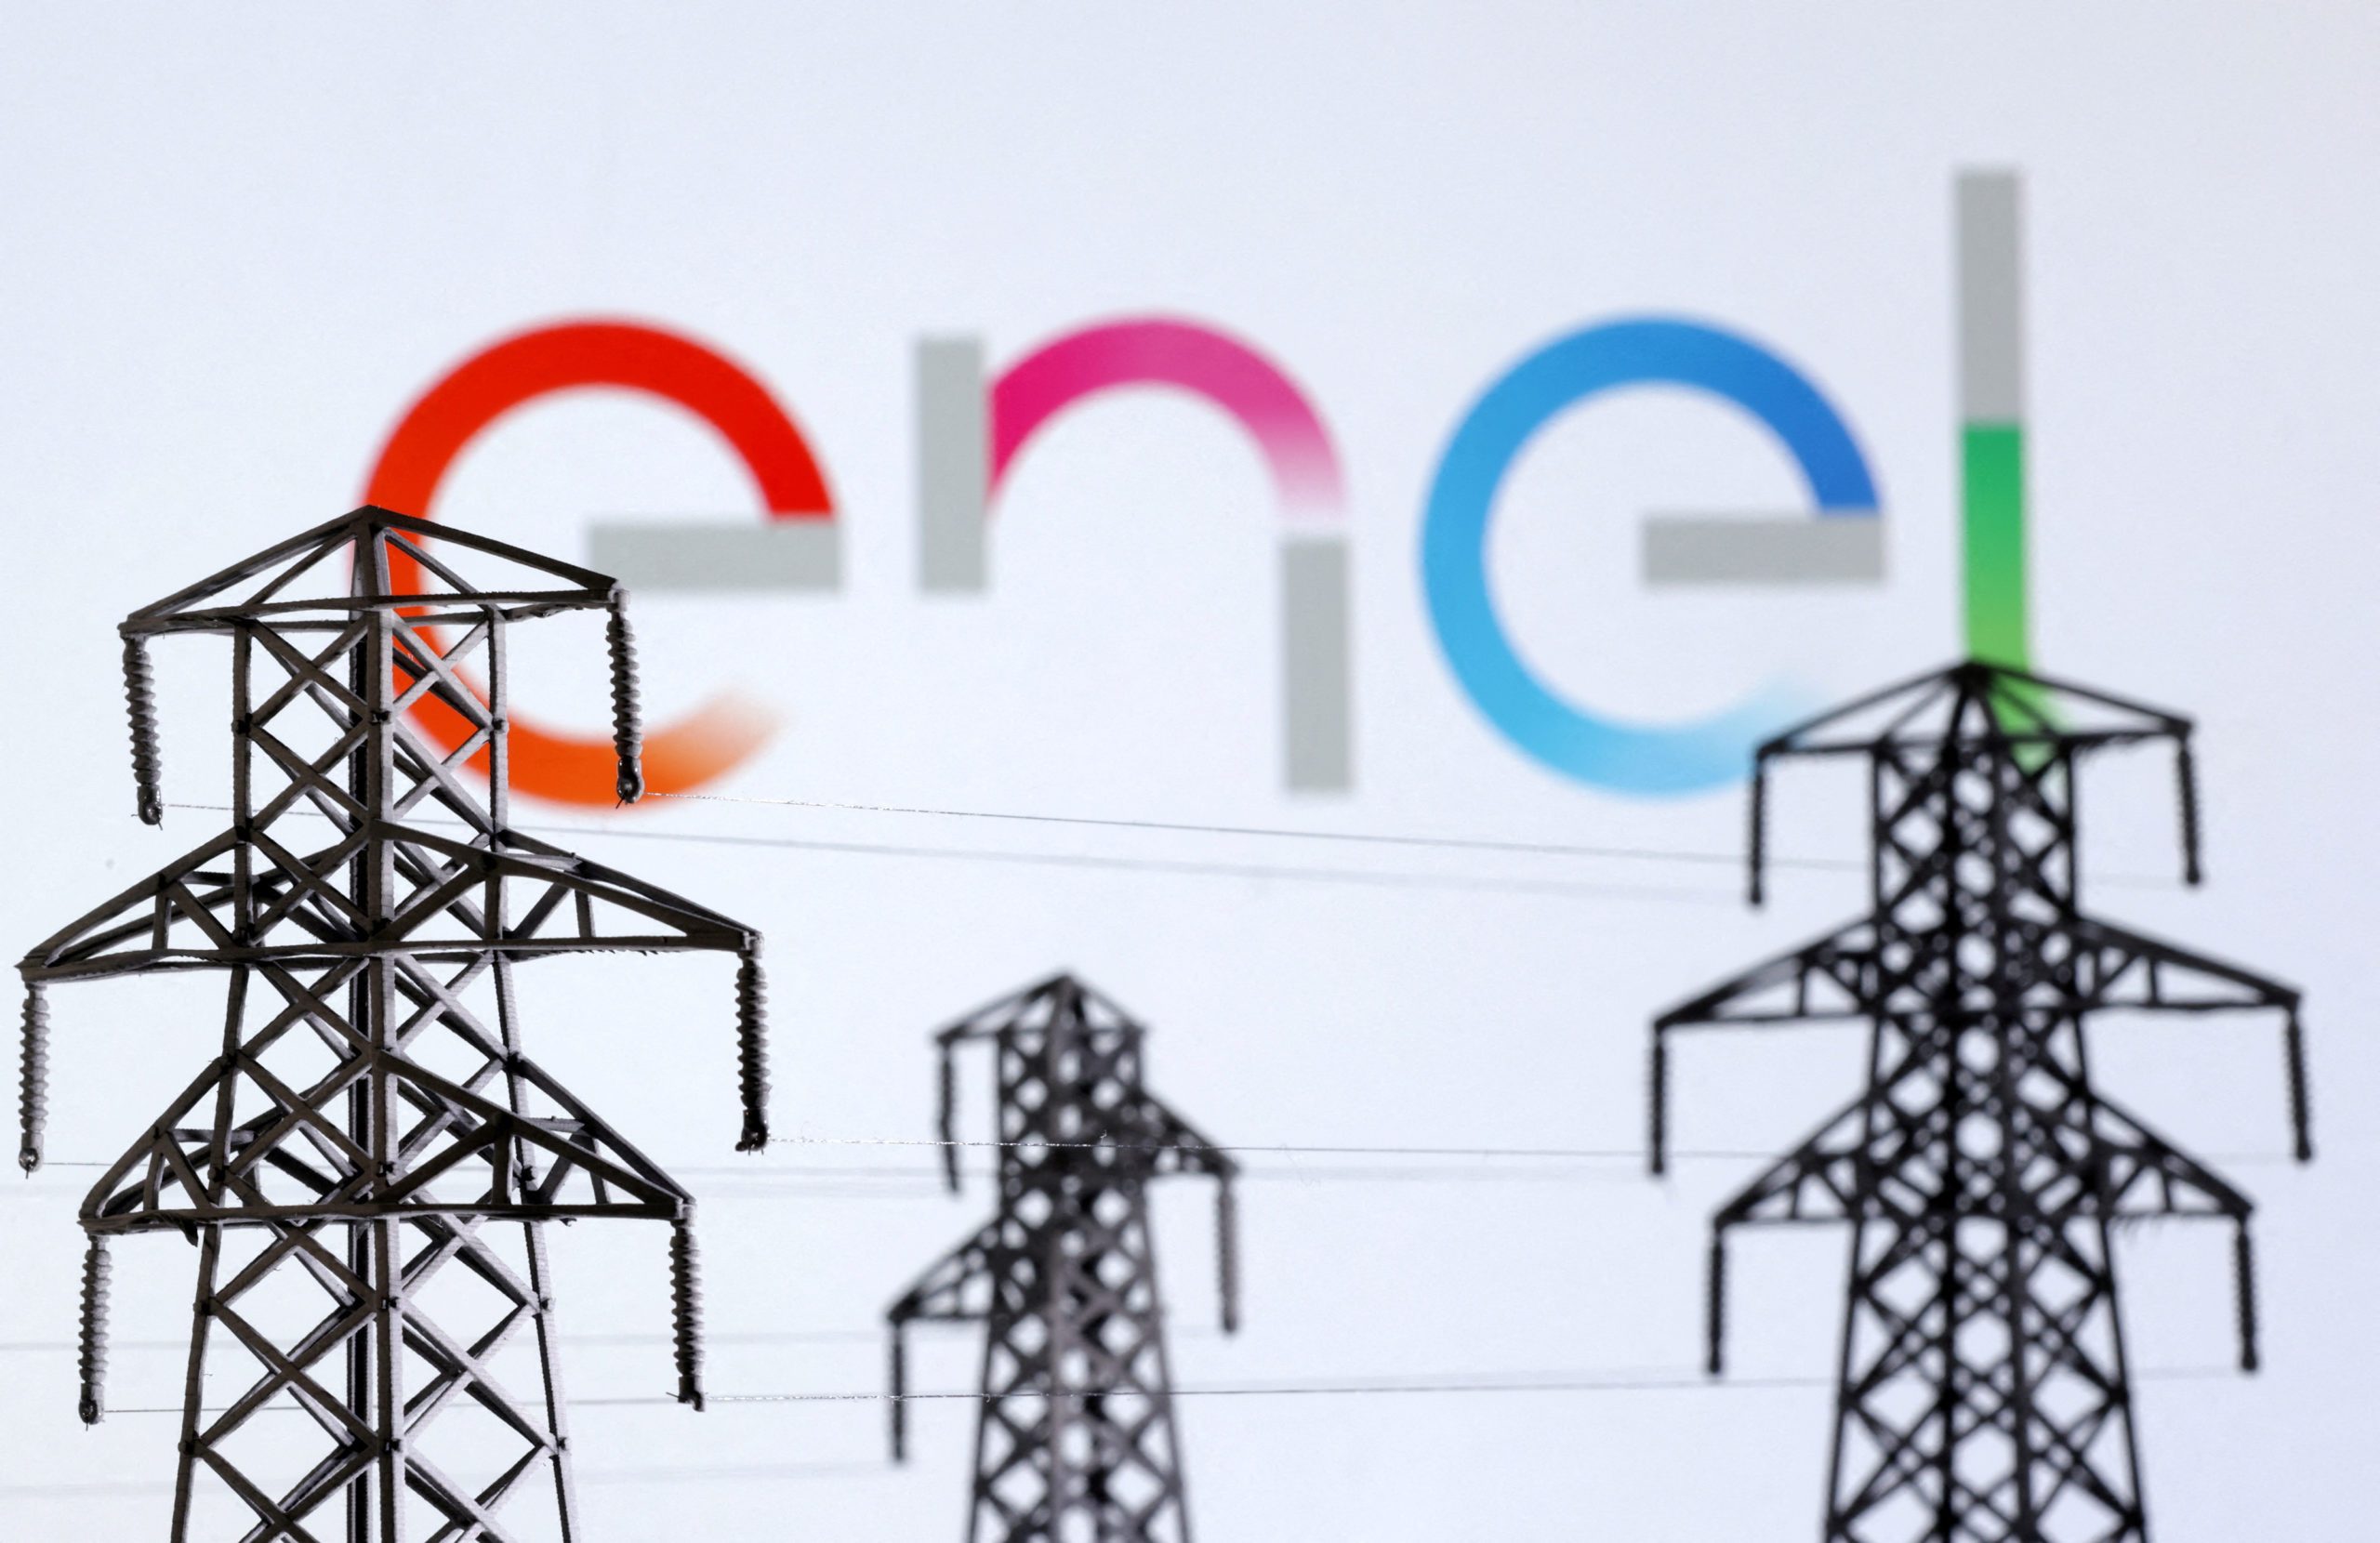 Enel agrees to sell two Peruvian assets to China's CSGI for $2.9b